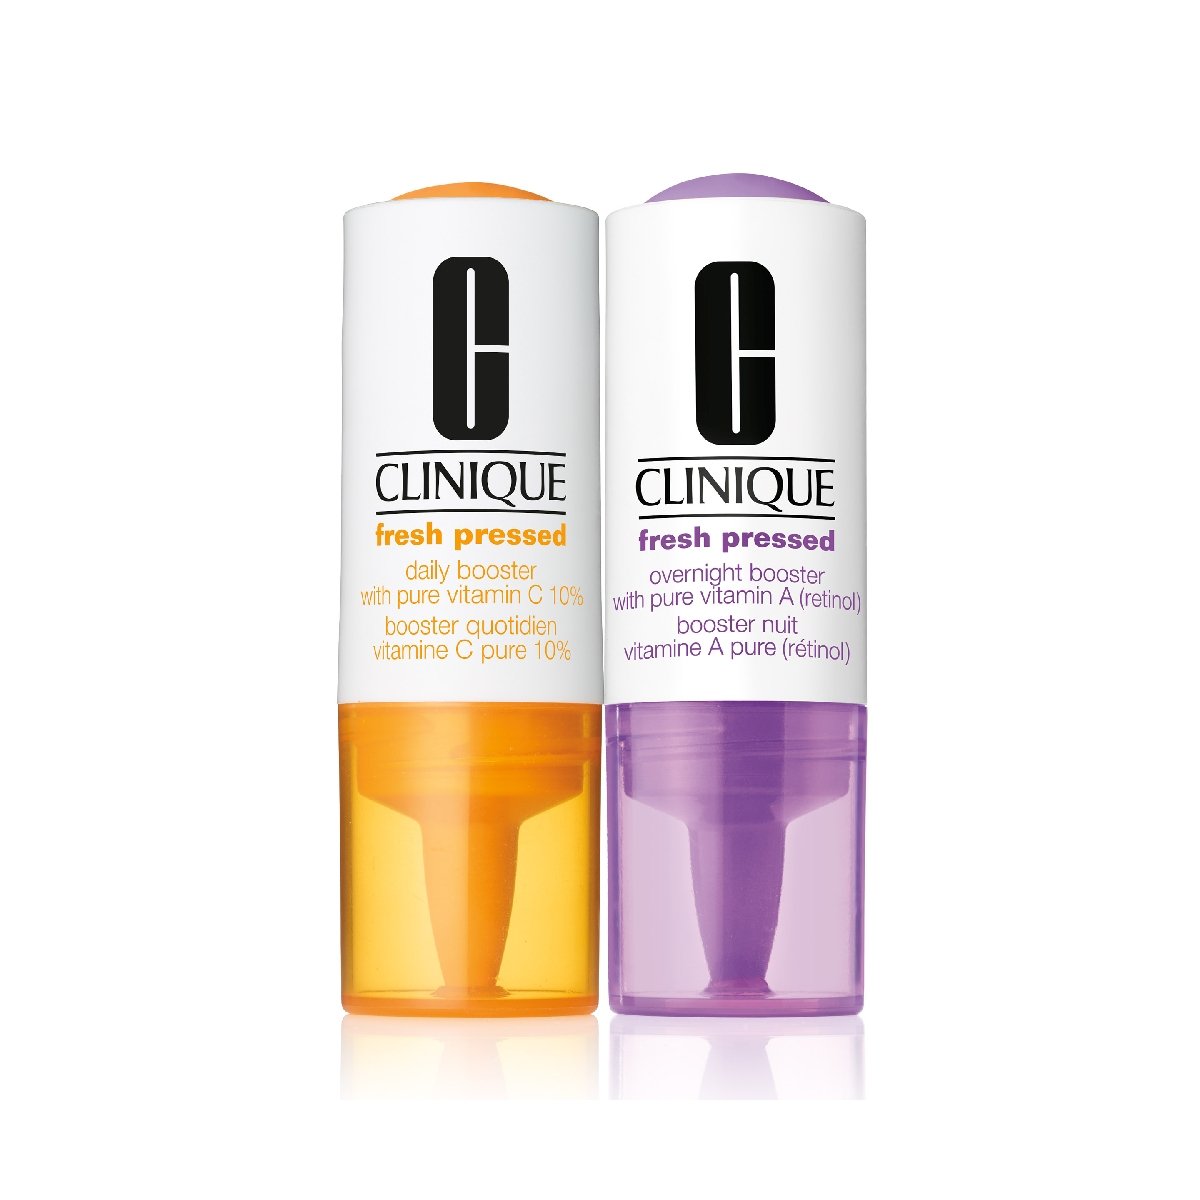 Clinique Fresh Pressed Clinical Daily And Overnight Boosters With Pure Vitamins C 10% + a (Retinol) 1 + 1 System 2 Boosters